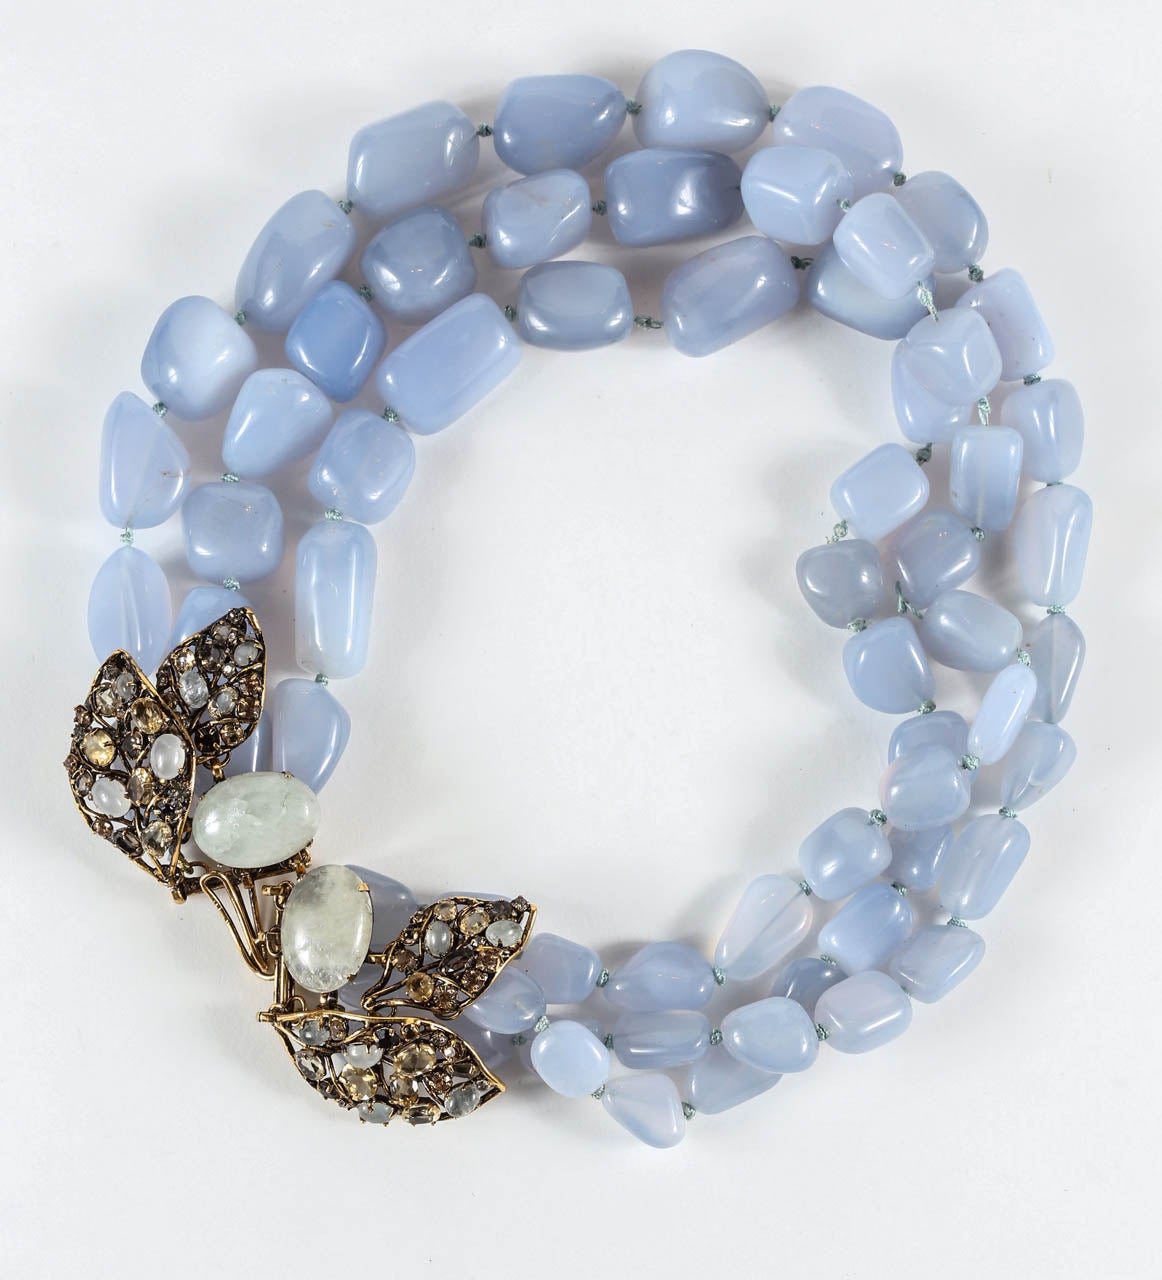 A beautiful triple strand of large, irregular chalcedony beads with a brass clasp set with a pair of large quartz cabochons and leaves set with citrine, topaz, quartz & rhinestones. Although unmarked, this is unquestionably the work of Iradj Moini.